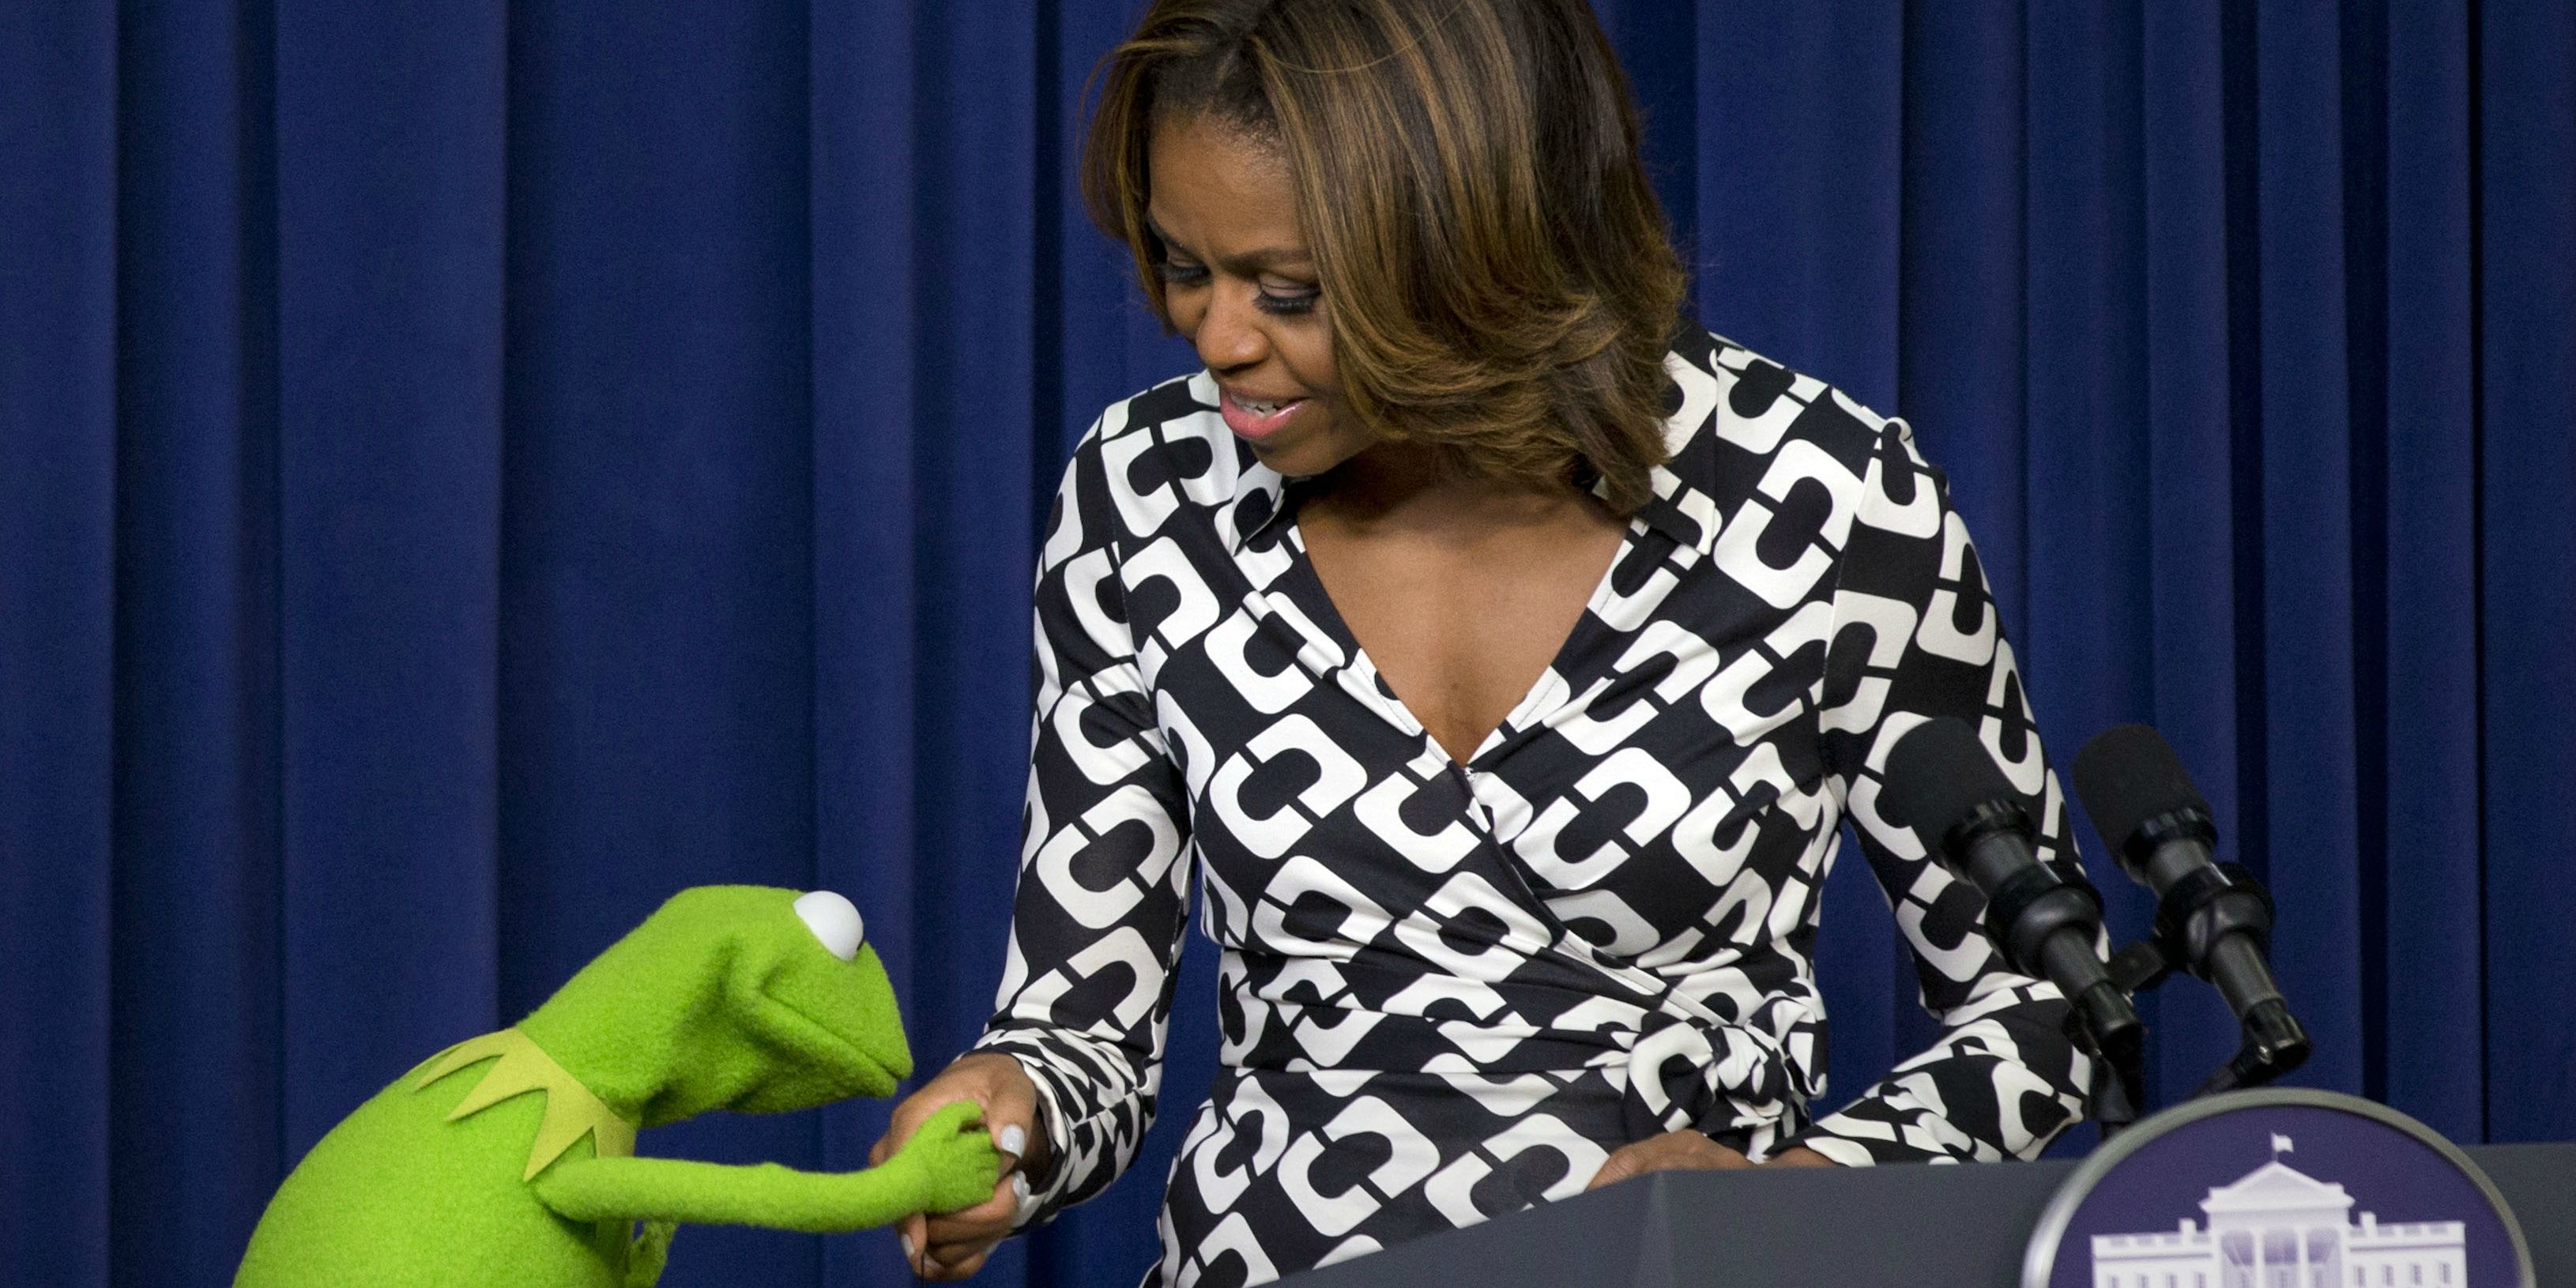 15 Things You Never Knew About Kermit The Frog